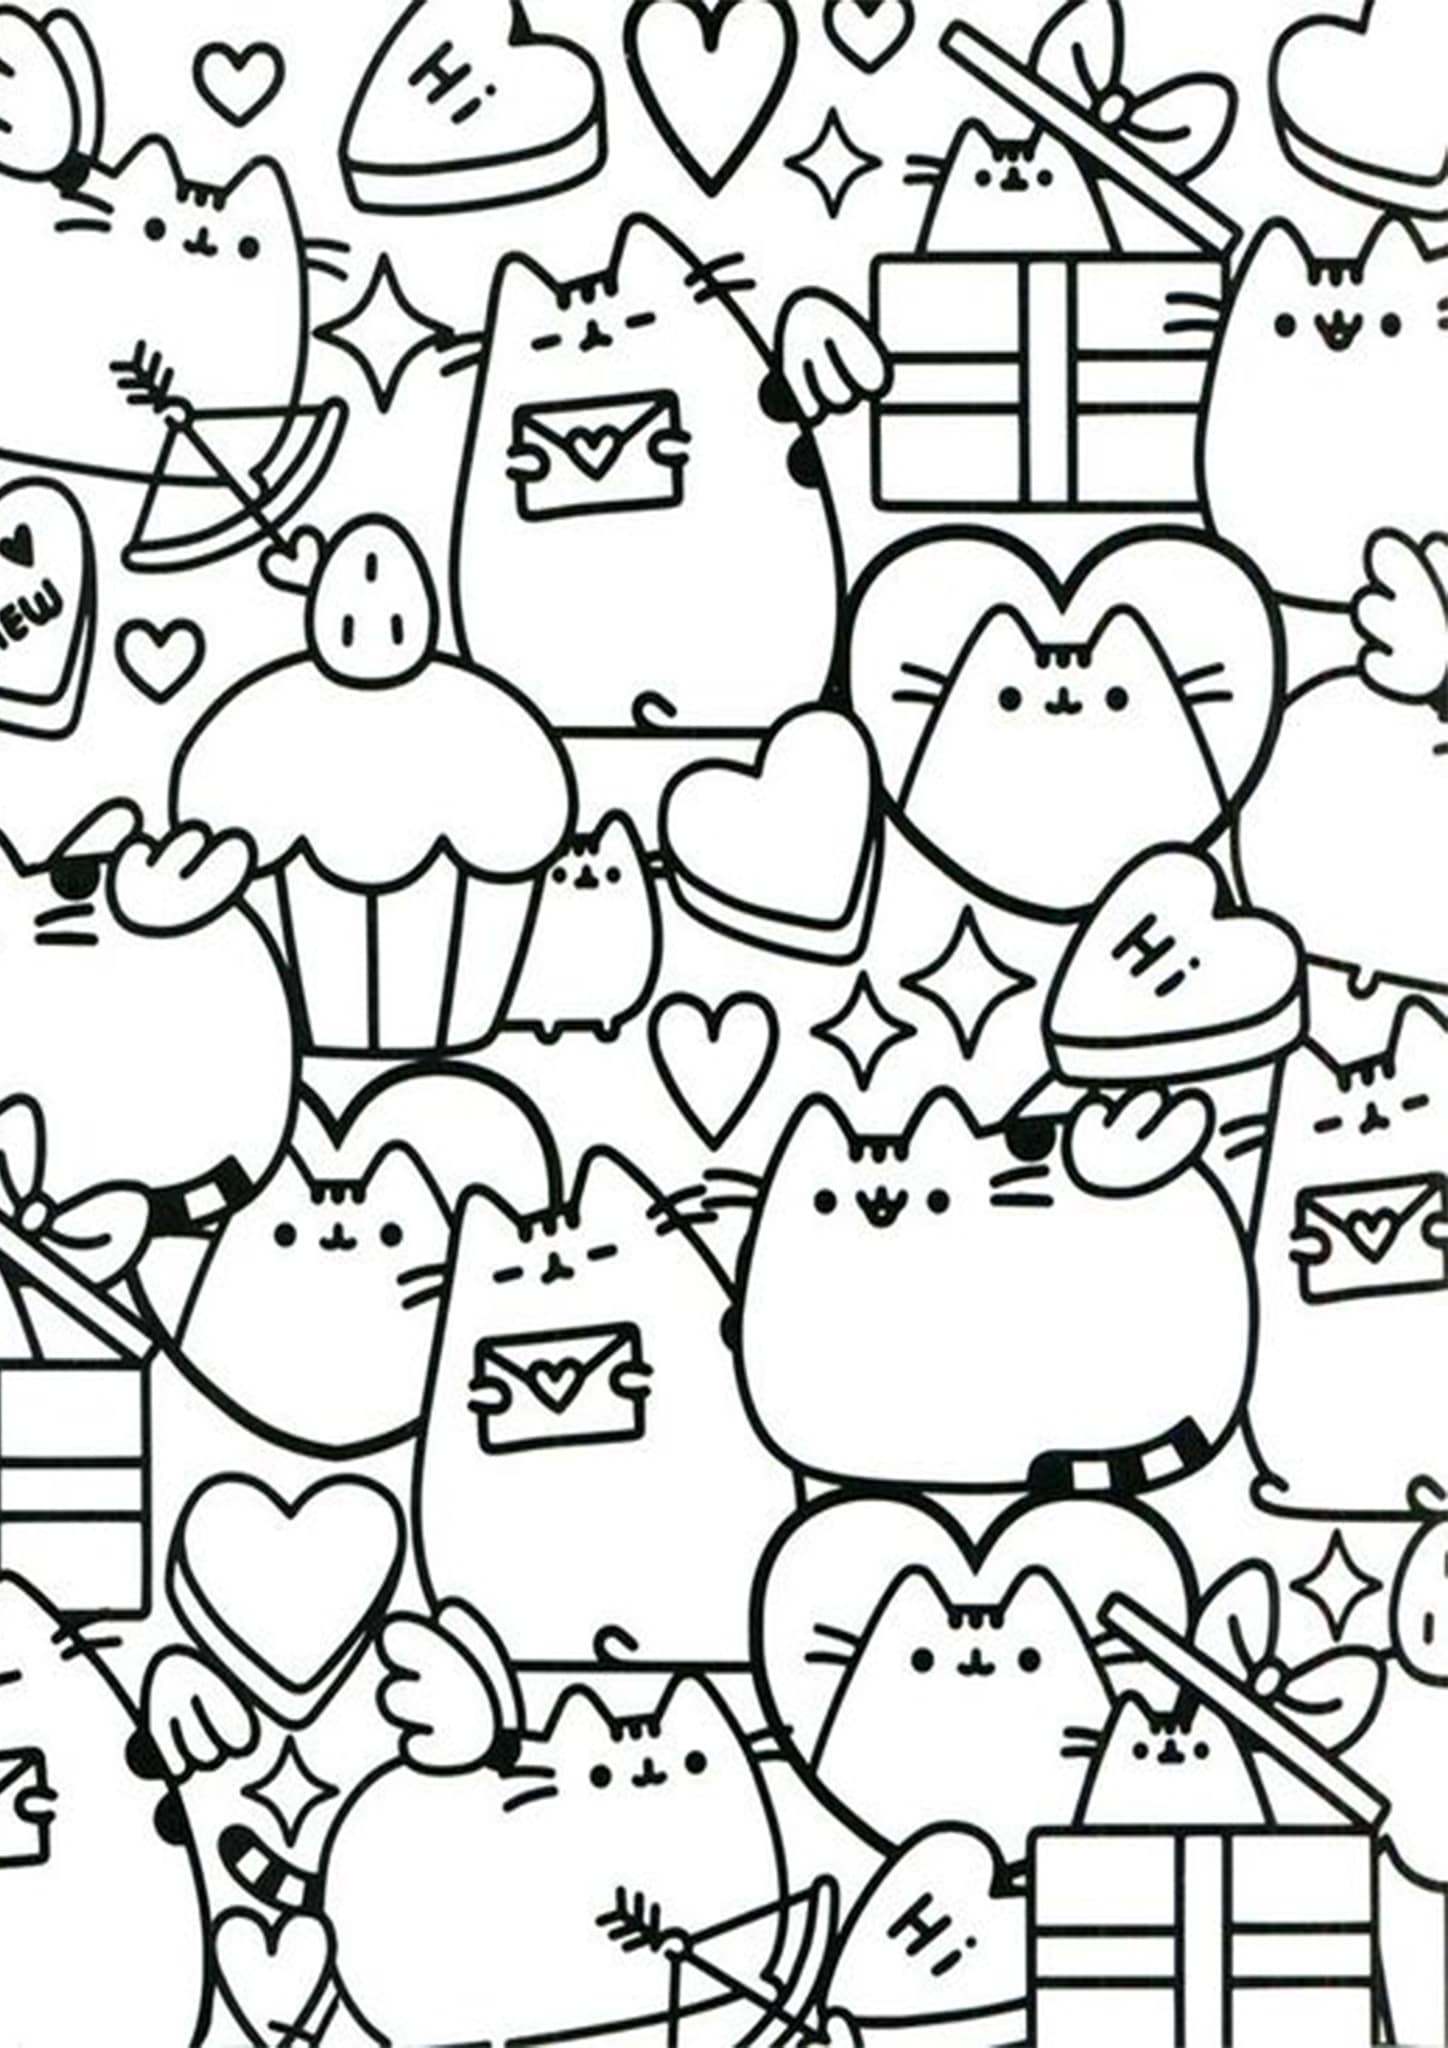 Download Free & Easy To Print Pusheen Coloring Pages - Tulamama